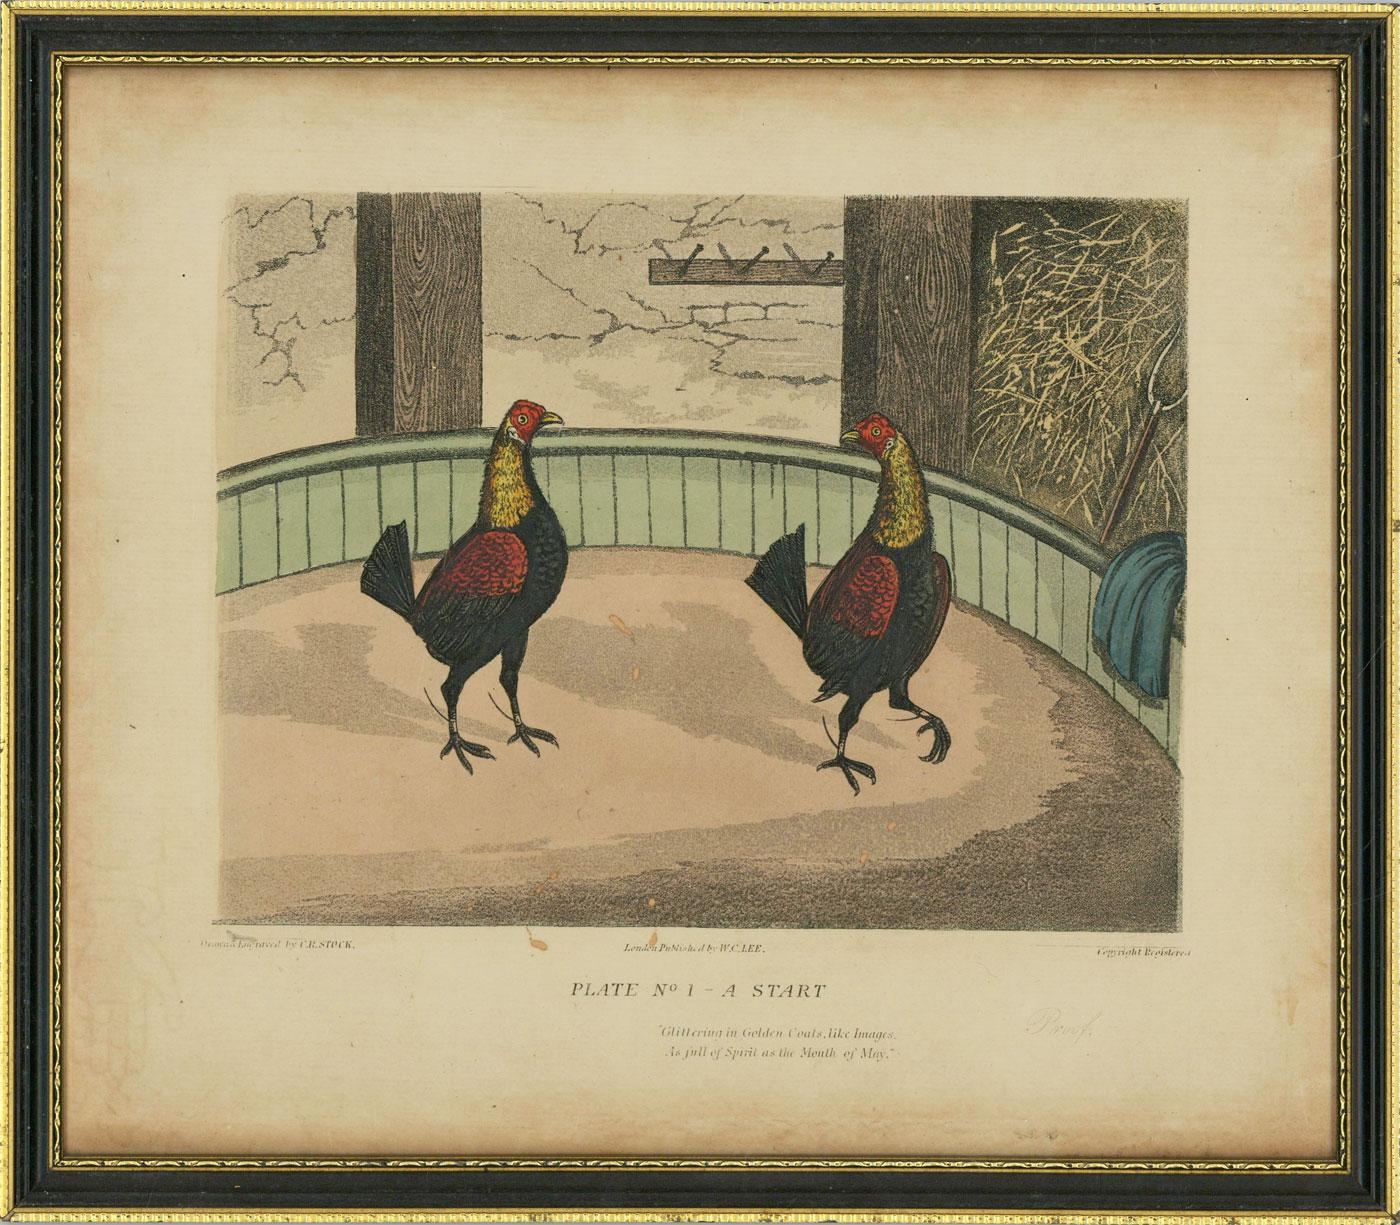 Unknown Animal Print - C.R. Stock - Set of Six Early 19th Century Engravings, Cockfighting Series